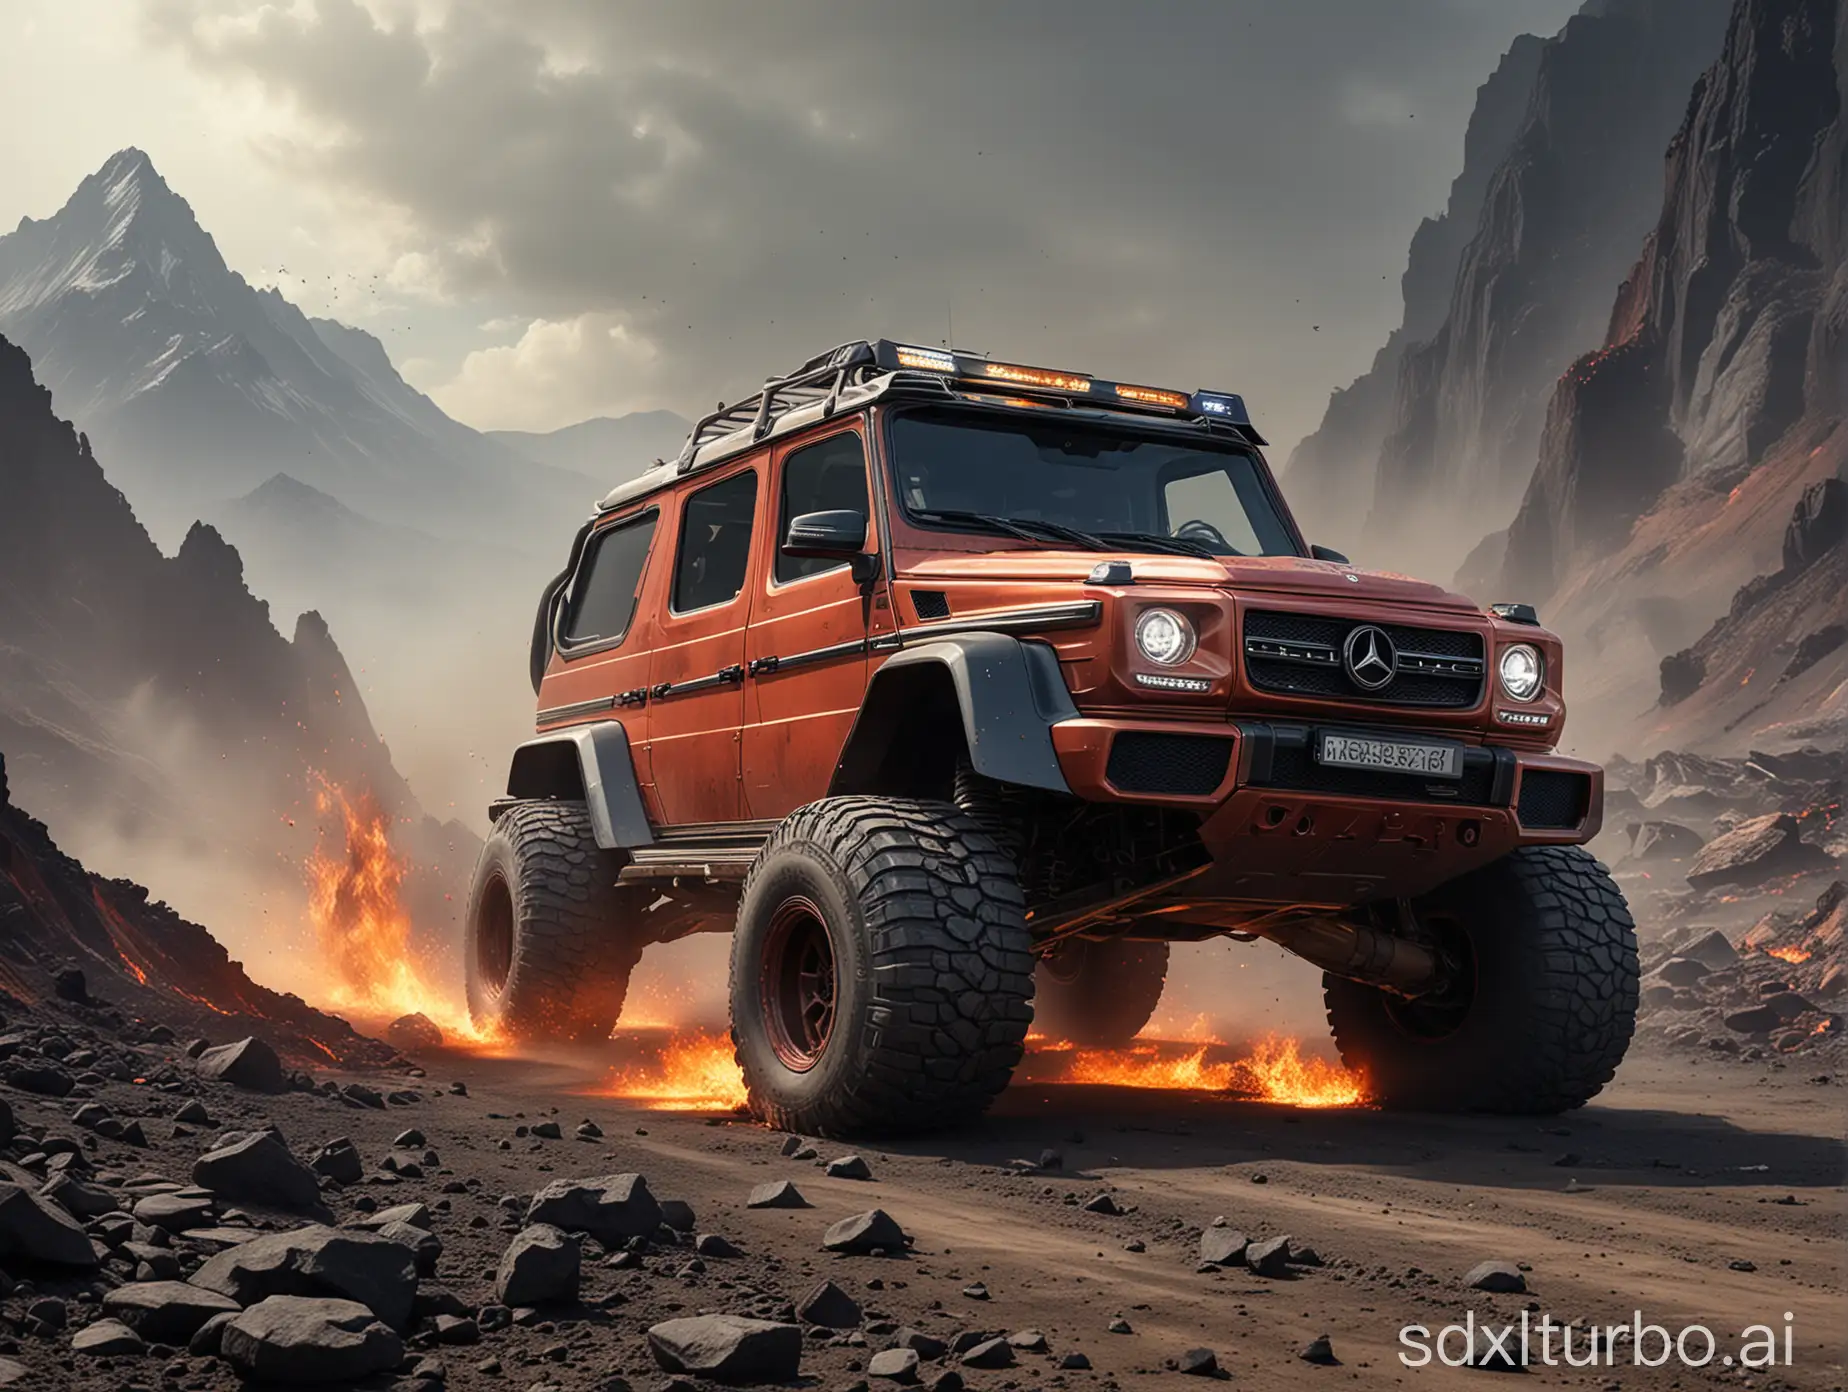 English

Chinese (Simplified)

German

English

Chinese (Simplified)

Japanese
Original
The 500-meter fire unicorn animal rushed out of the volcano, and the fire unicorn chased the future Mercedes-Benz G. Referring to "Clash of the Titans", the future Mercedes-Benz G is speeding in front, the ground cracks and magma spurts out, the tires rotate rapidly, low angle of view, sports atmosphere rendering, large scene, wide angle, Hollywood science fiction style
